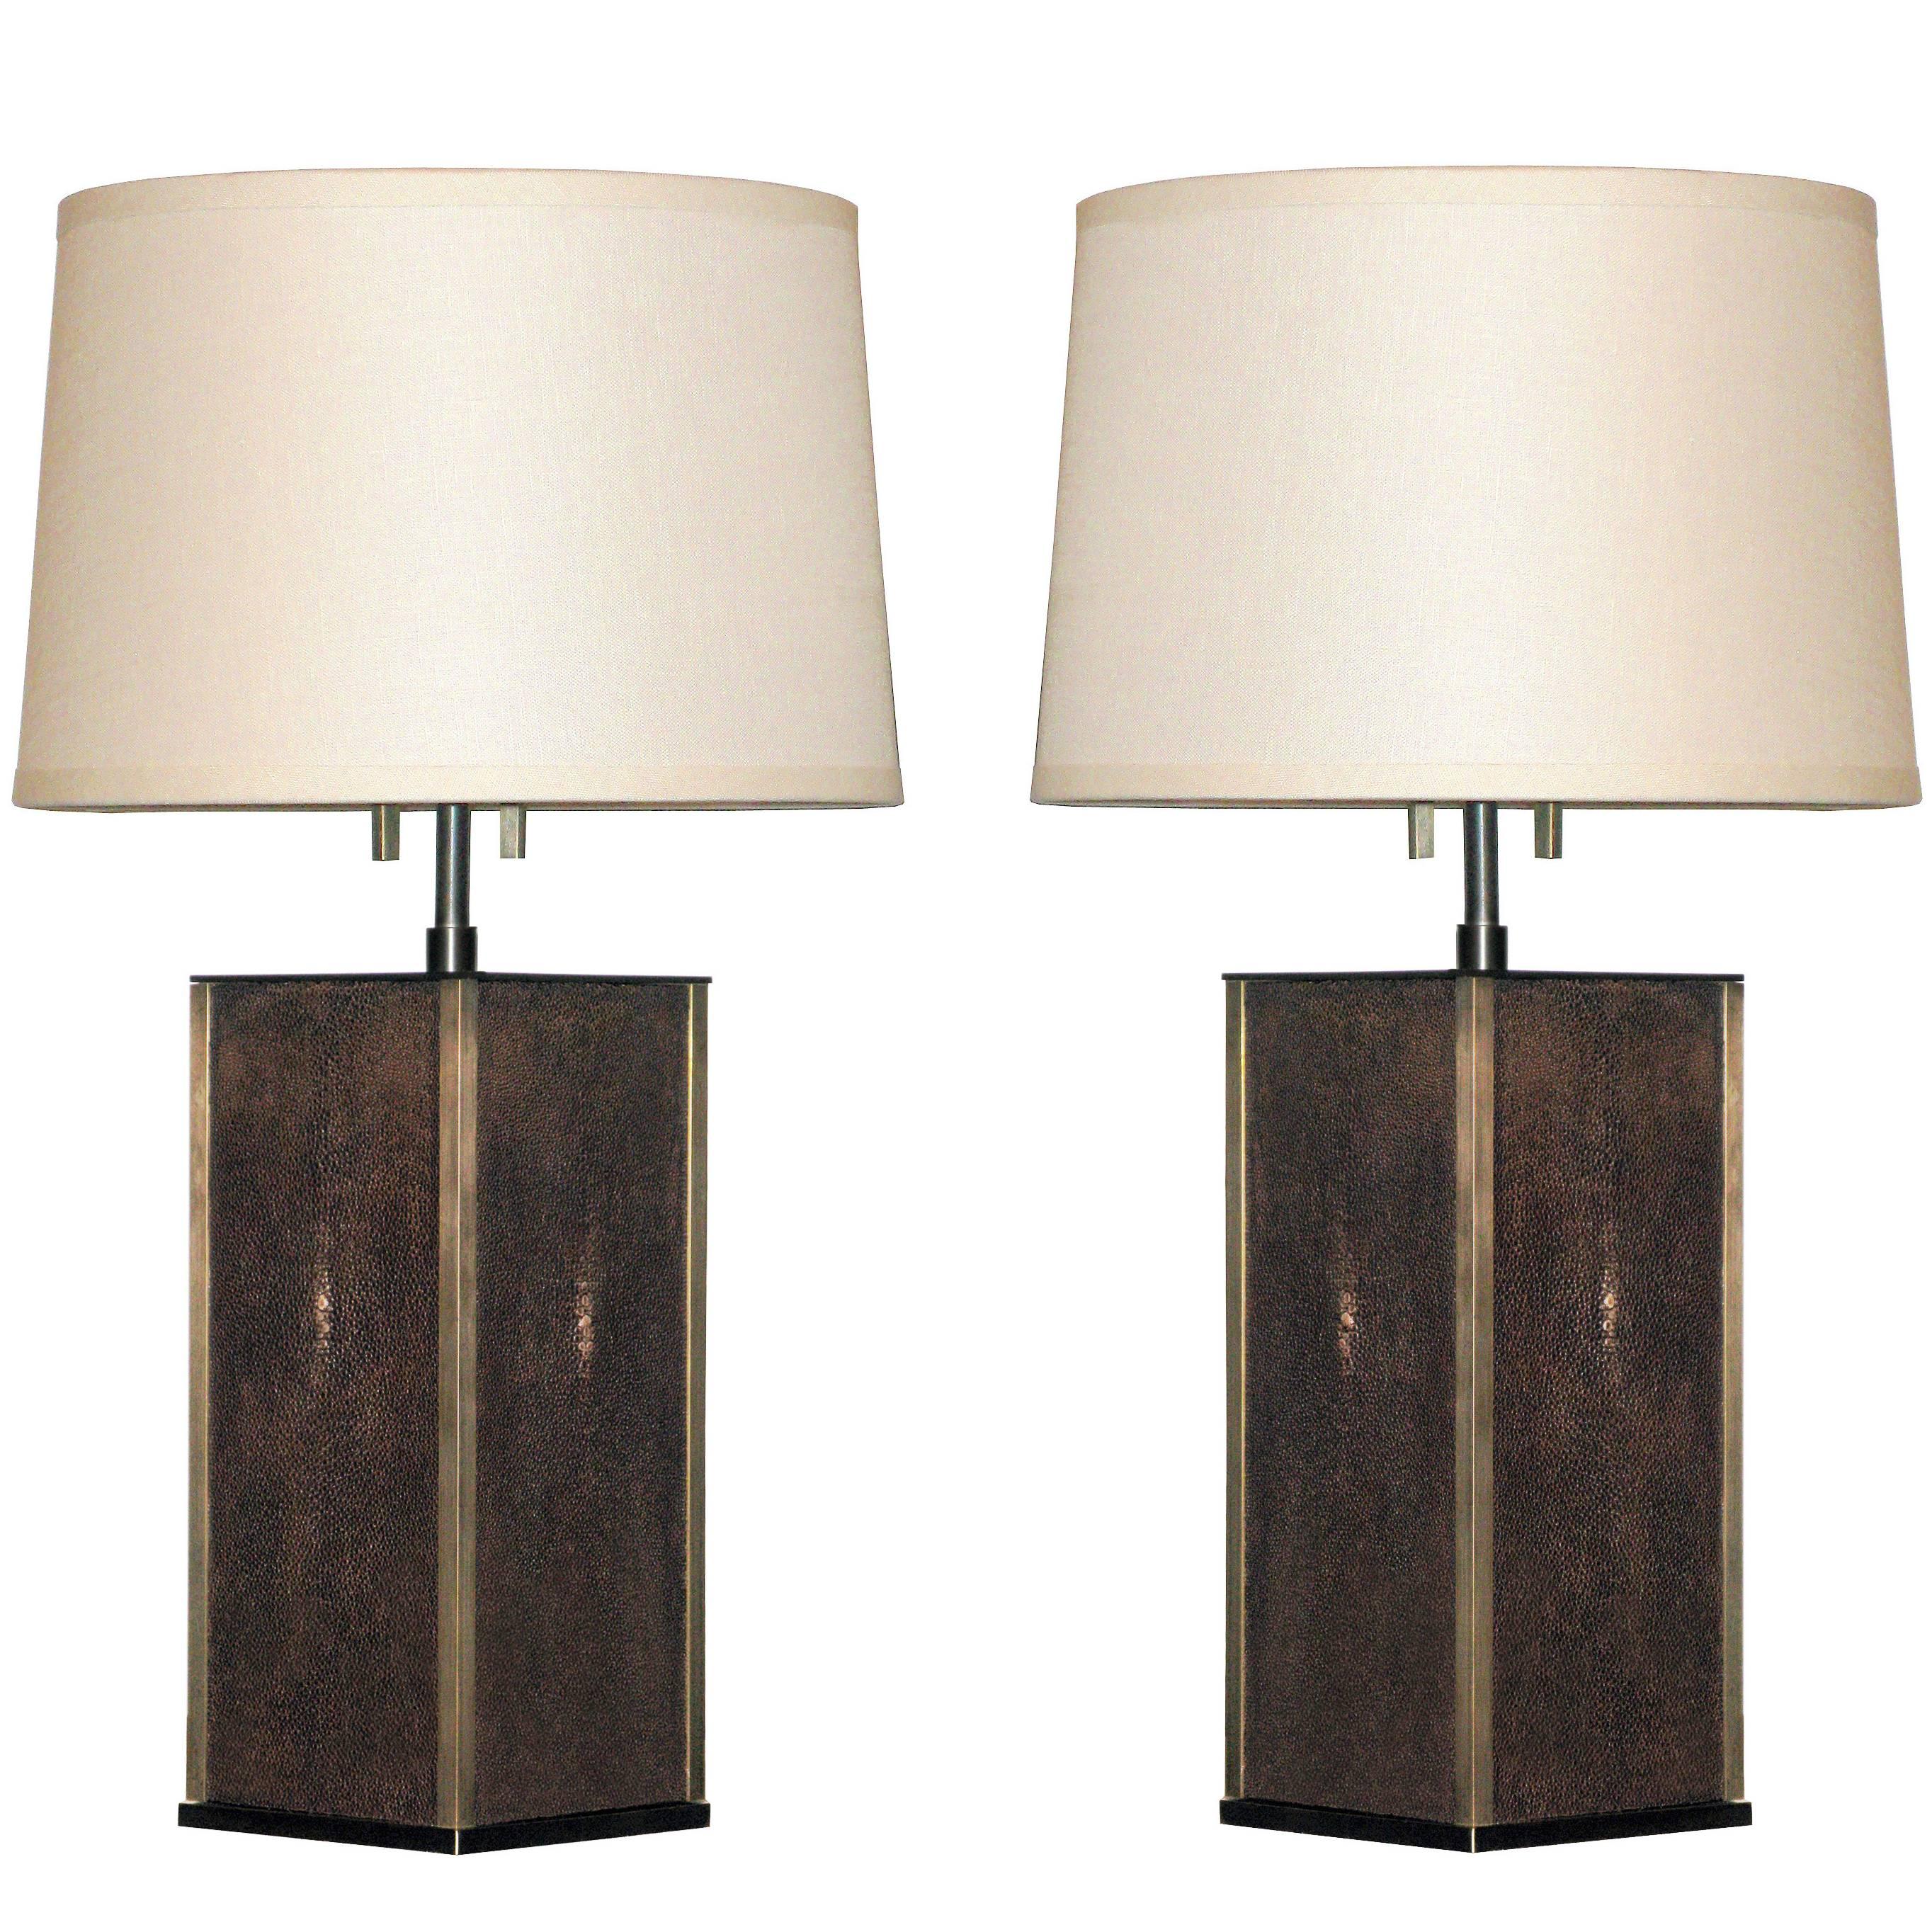 Pair of Table Lamps in Bronze with Shagreen Panels by Karl Springer